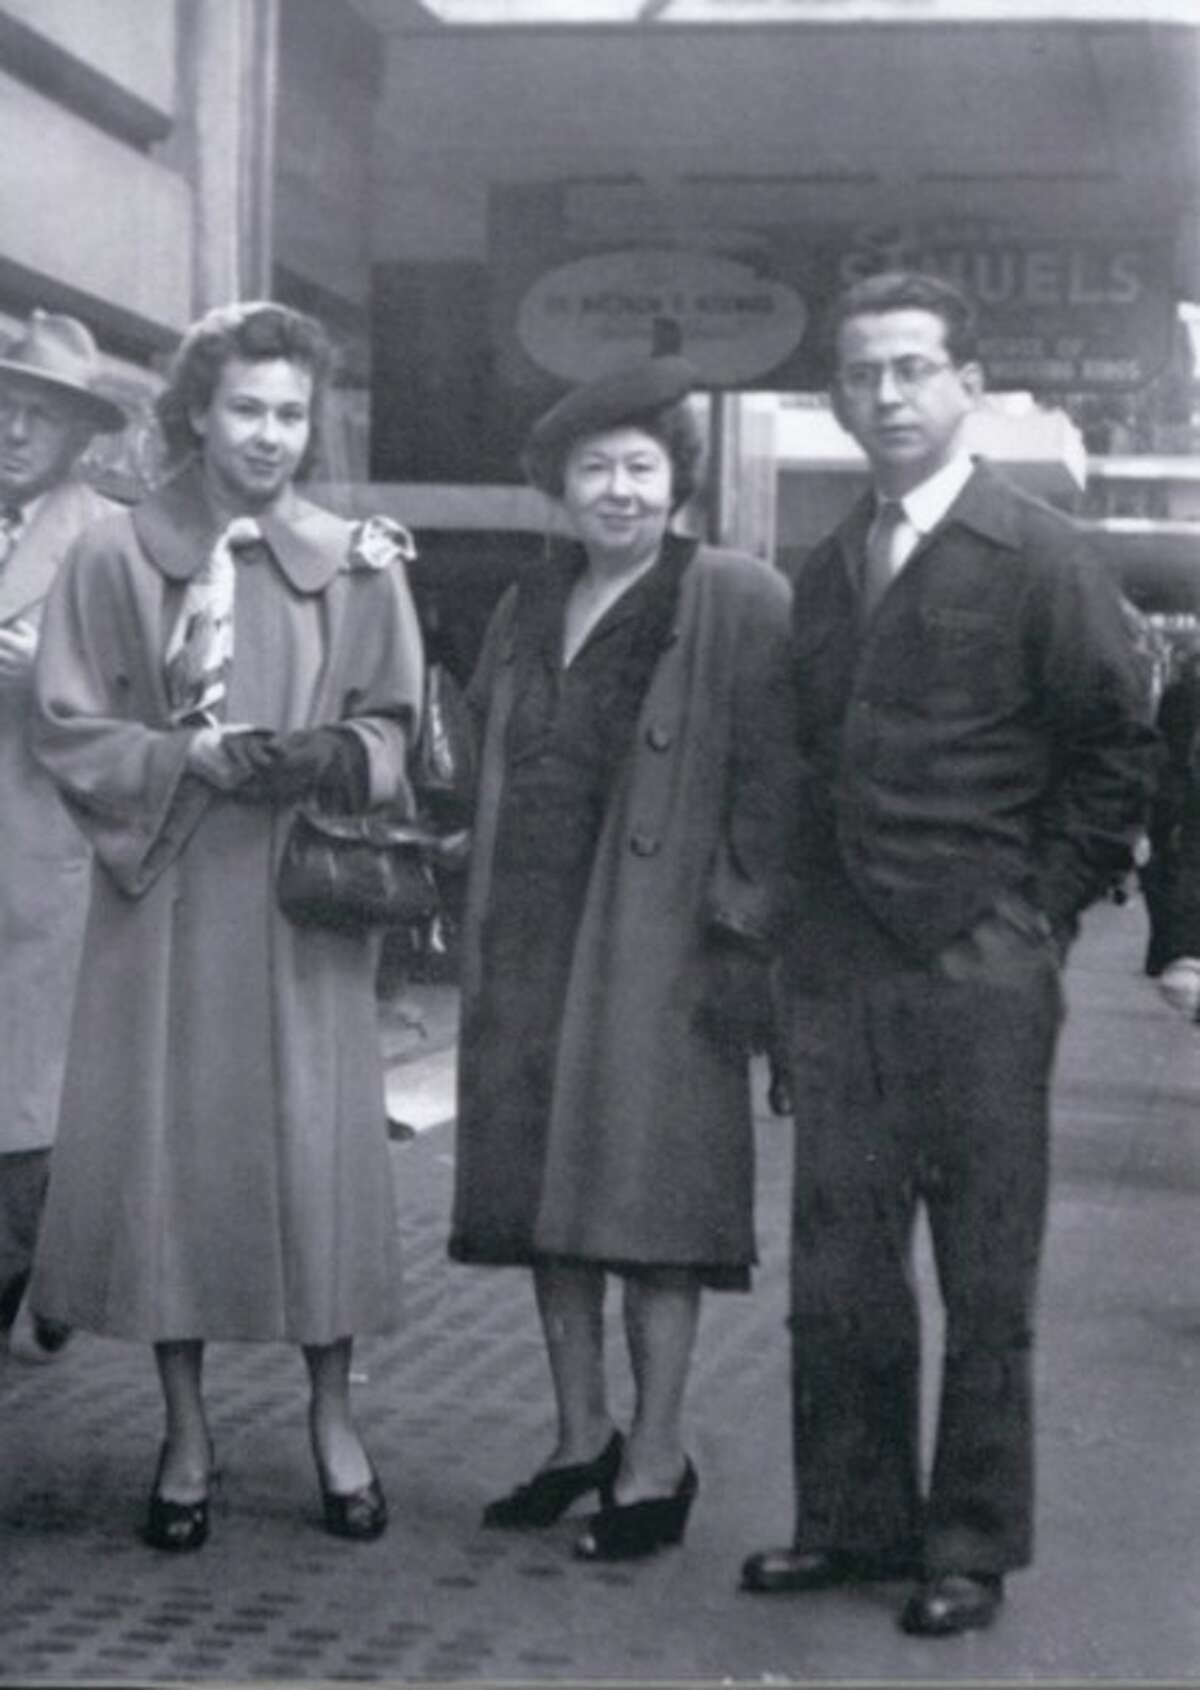 Anna Pellerin Keppel poses on the streets of San Francisco with her daughter, Virginia, and her son, Judd, in 1947. Left a widow with two children to raise, Anna returned to Midland to open a beauty shop in 1924 and later went into the real estate business. She was a woman ahead of her times.